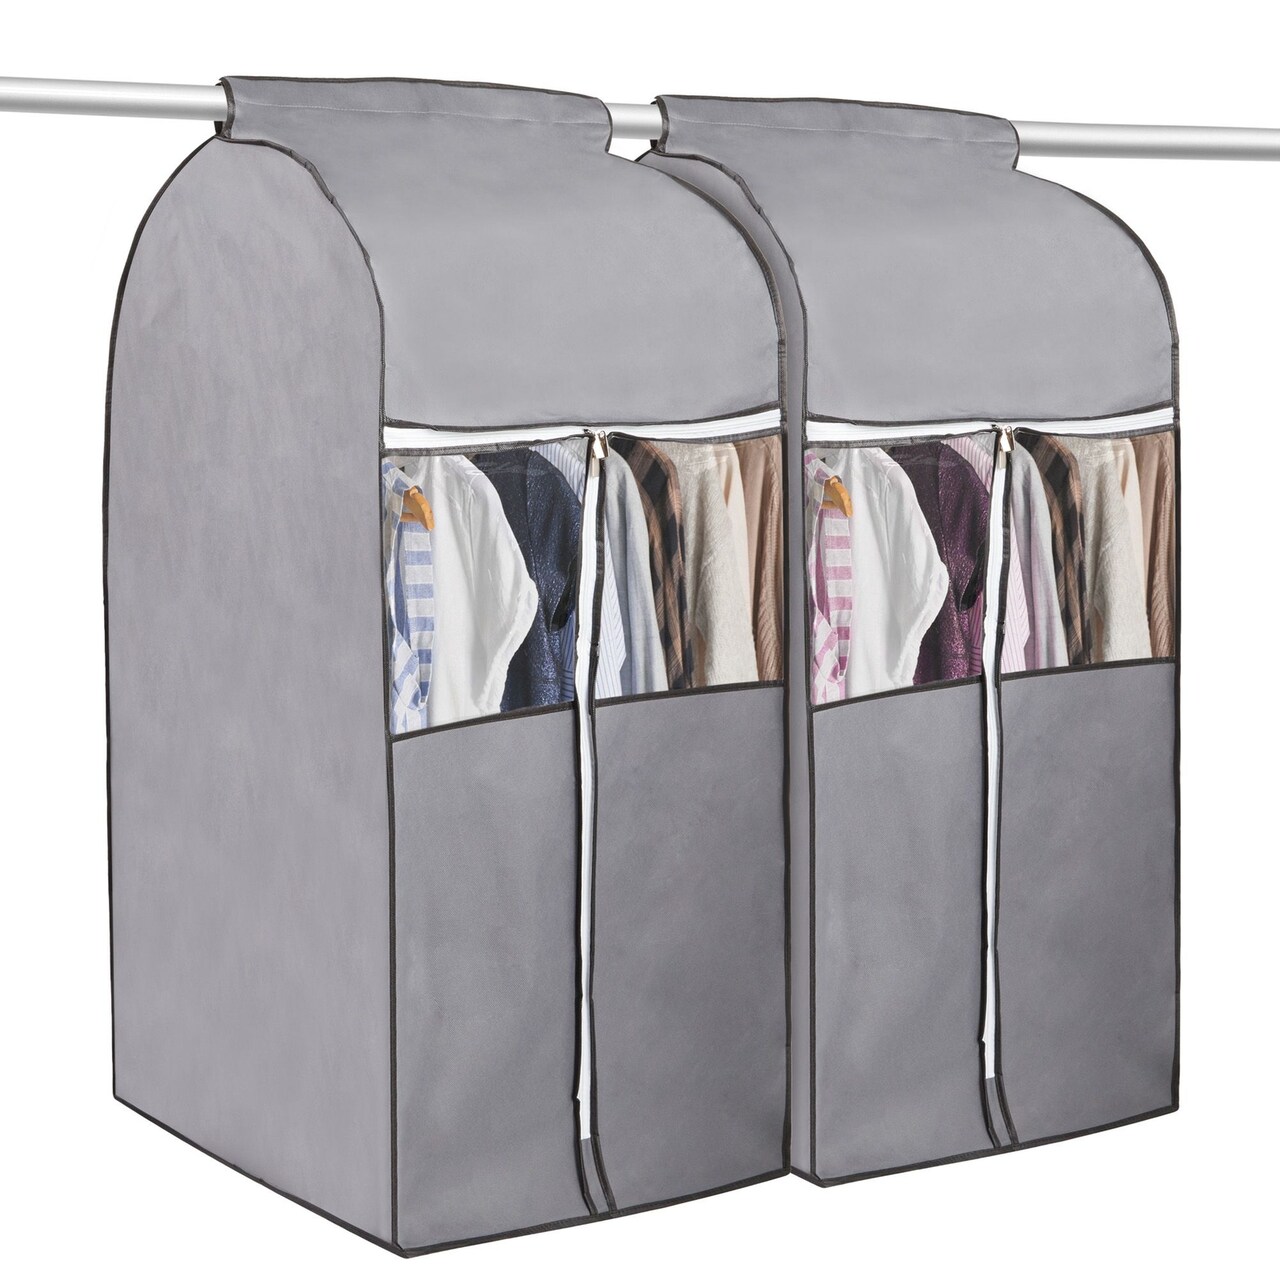 Hanging Garment Bags for Closet Storage with Window (Grey